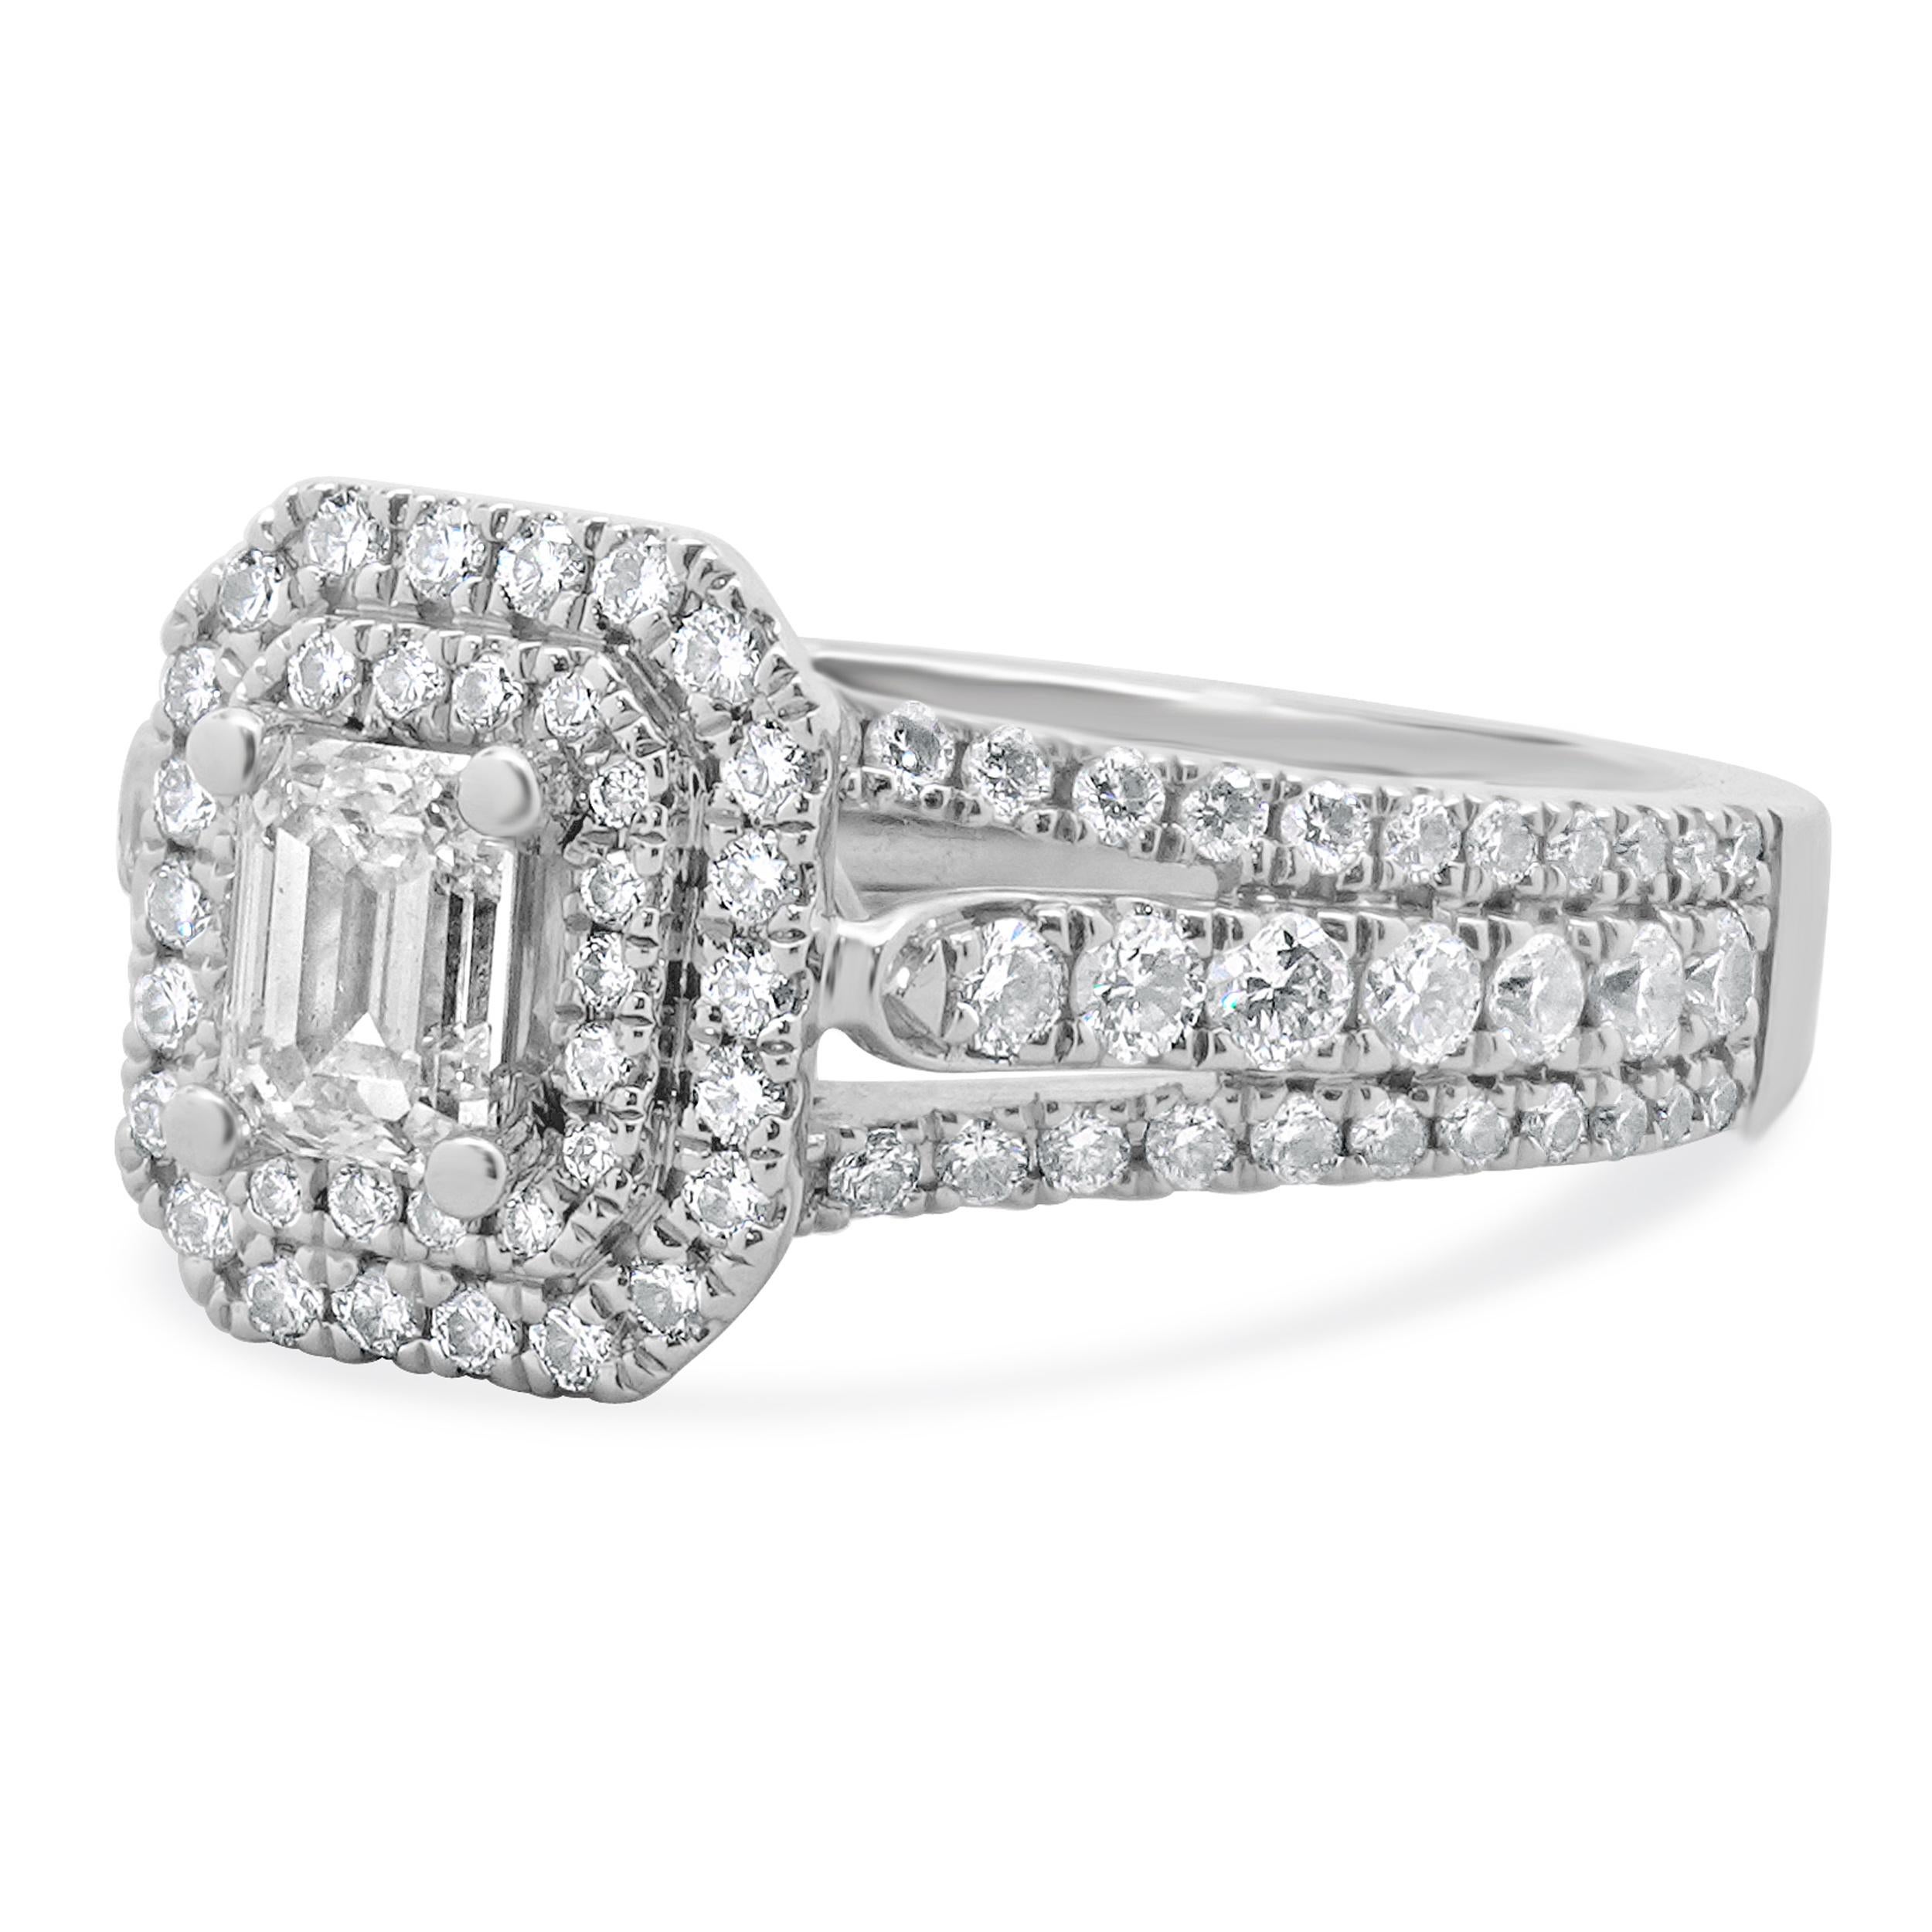 Designer: Vera Wang
Material: 14K white gold
Center Diamond: 1 emerald cut = 0.36ct
Color : H
Clarity : VS1
Diamond: 102 round brilliant cut = 0.60cttw
Color : G/H
Clarity : SI1-2
Size: 6.75 complimentary sizing available 
Weight: 6.25 grams
